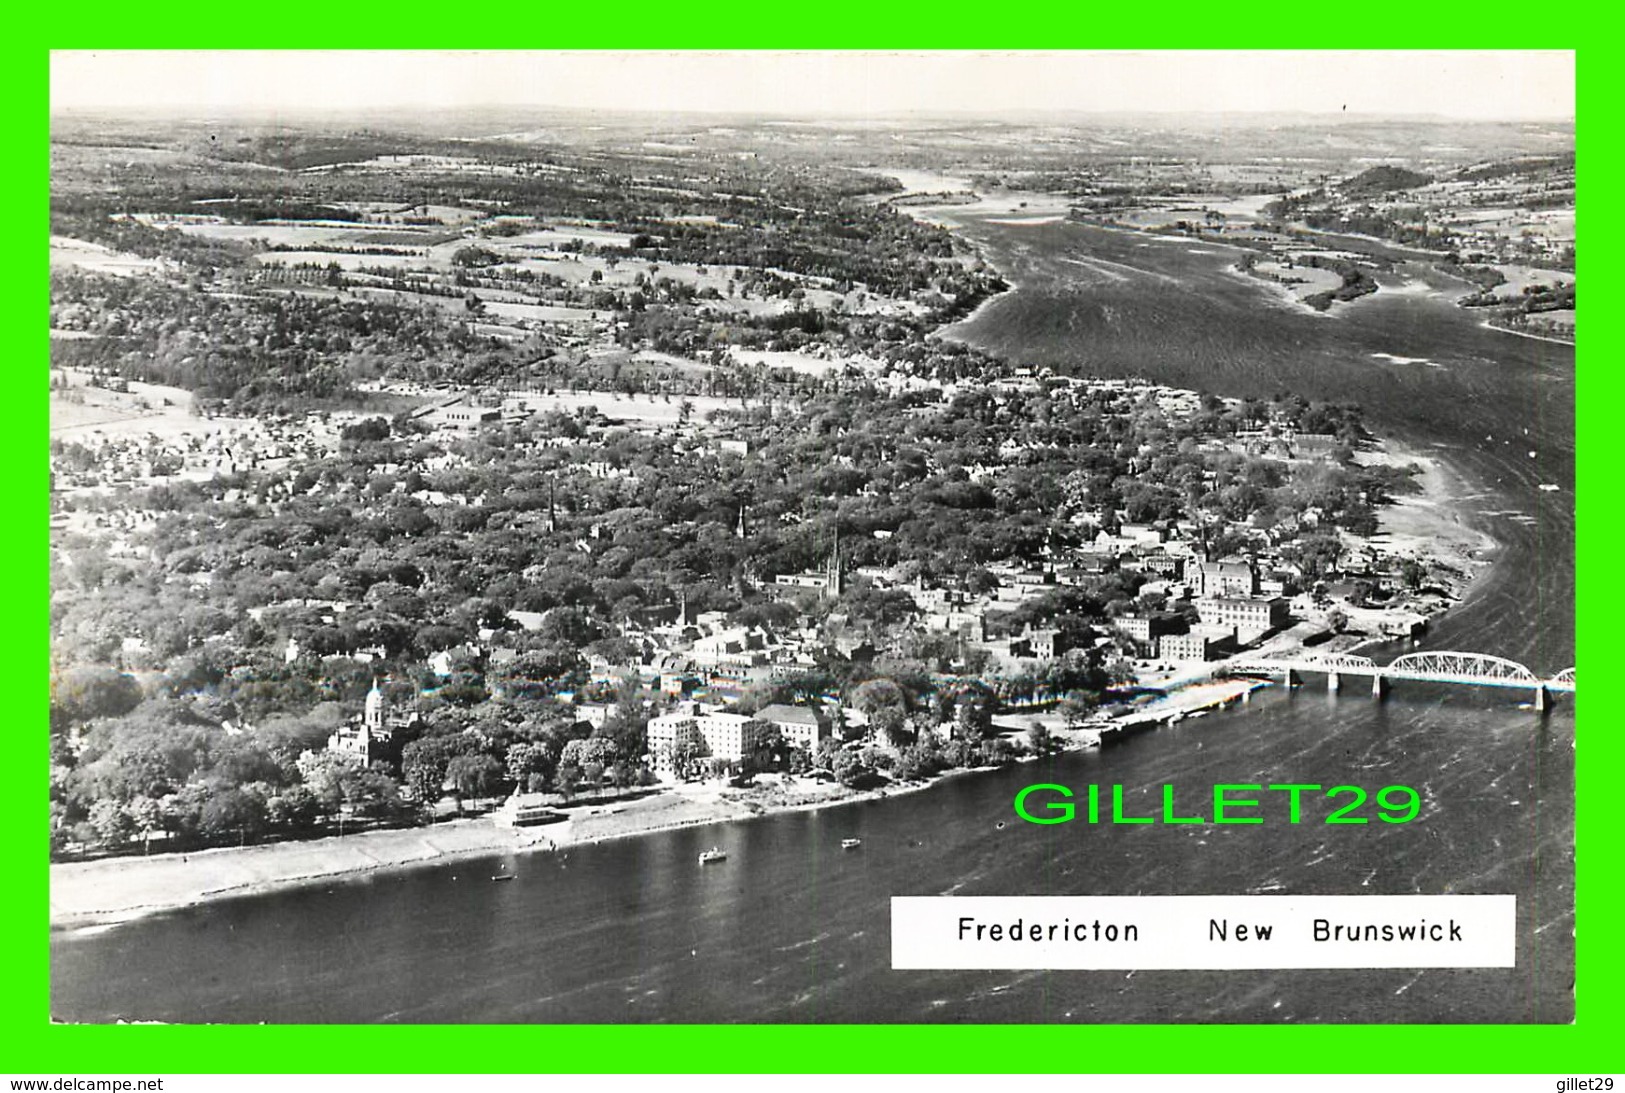 FREDERICTON, NEW BRUNSWICK - AIR VIEW OF THE CITY OF FREDERICTON - - Fredericton